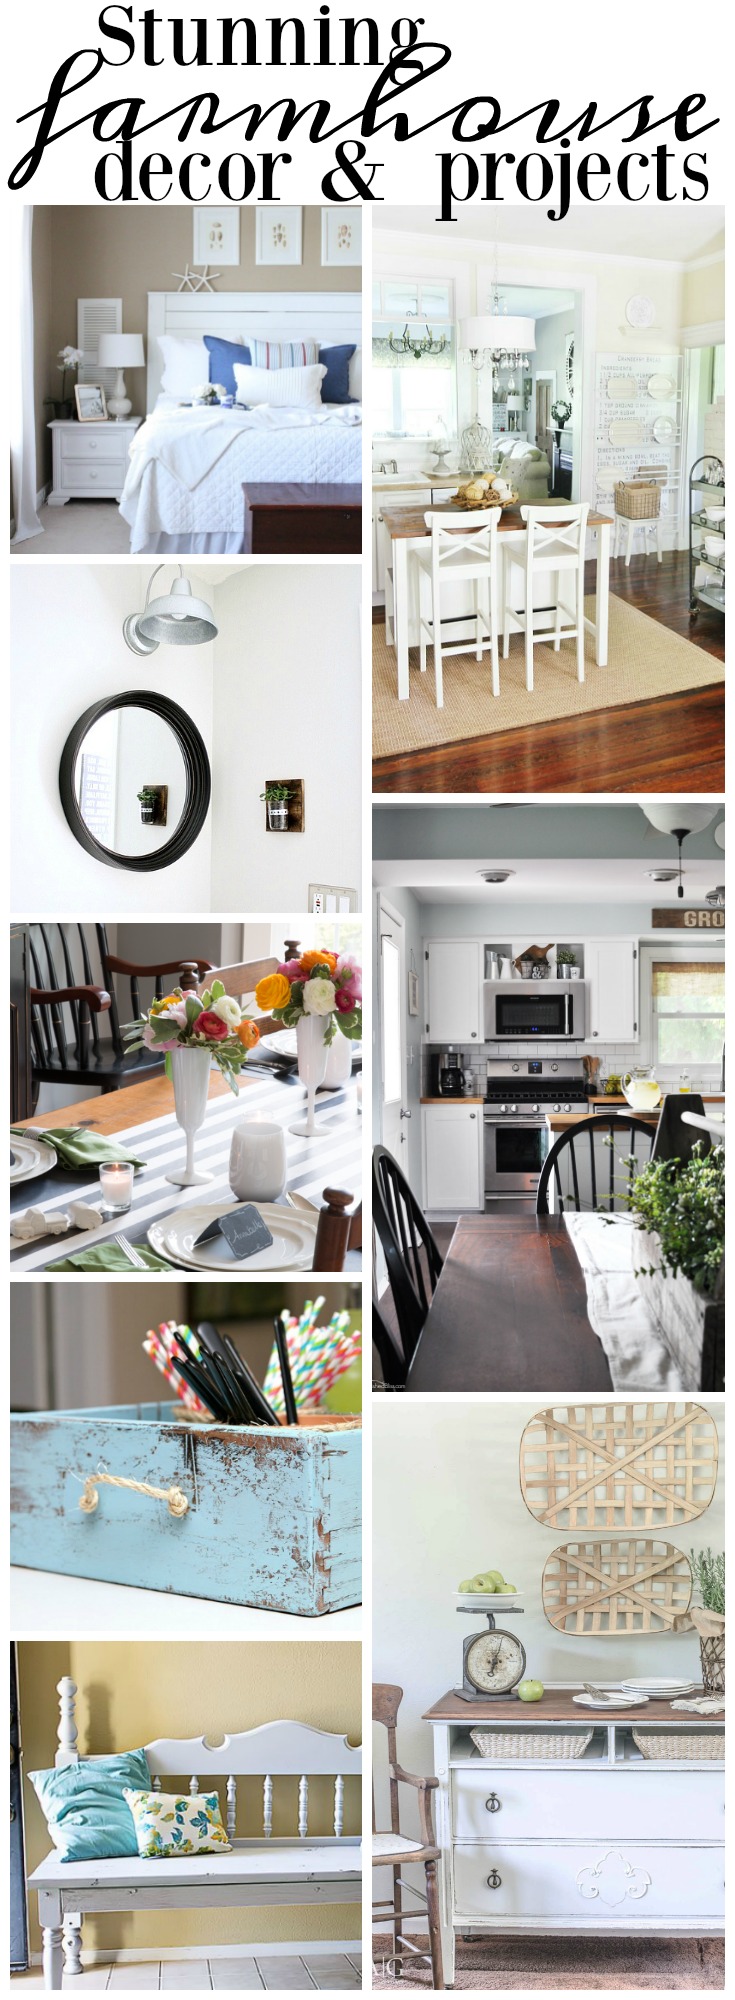 Stunning Farmhouse decor & projects graphic.